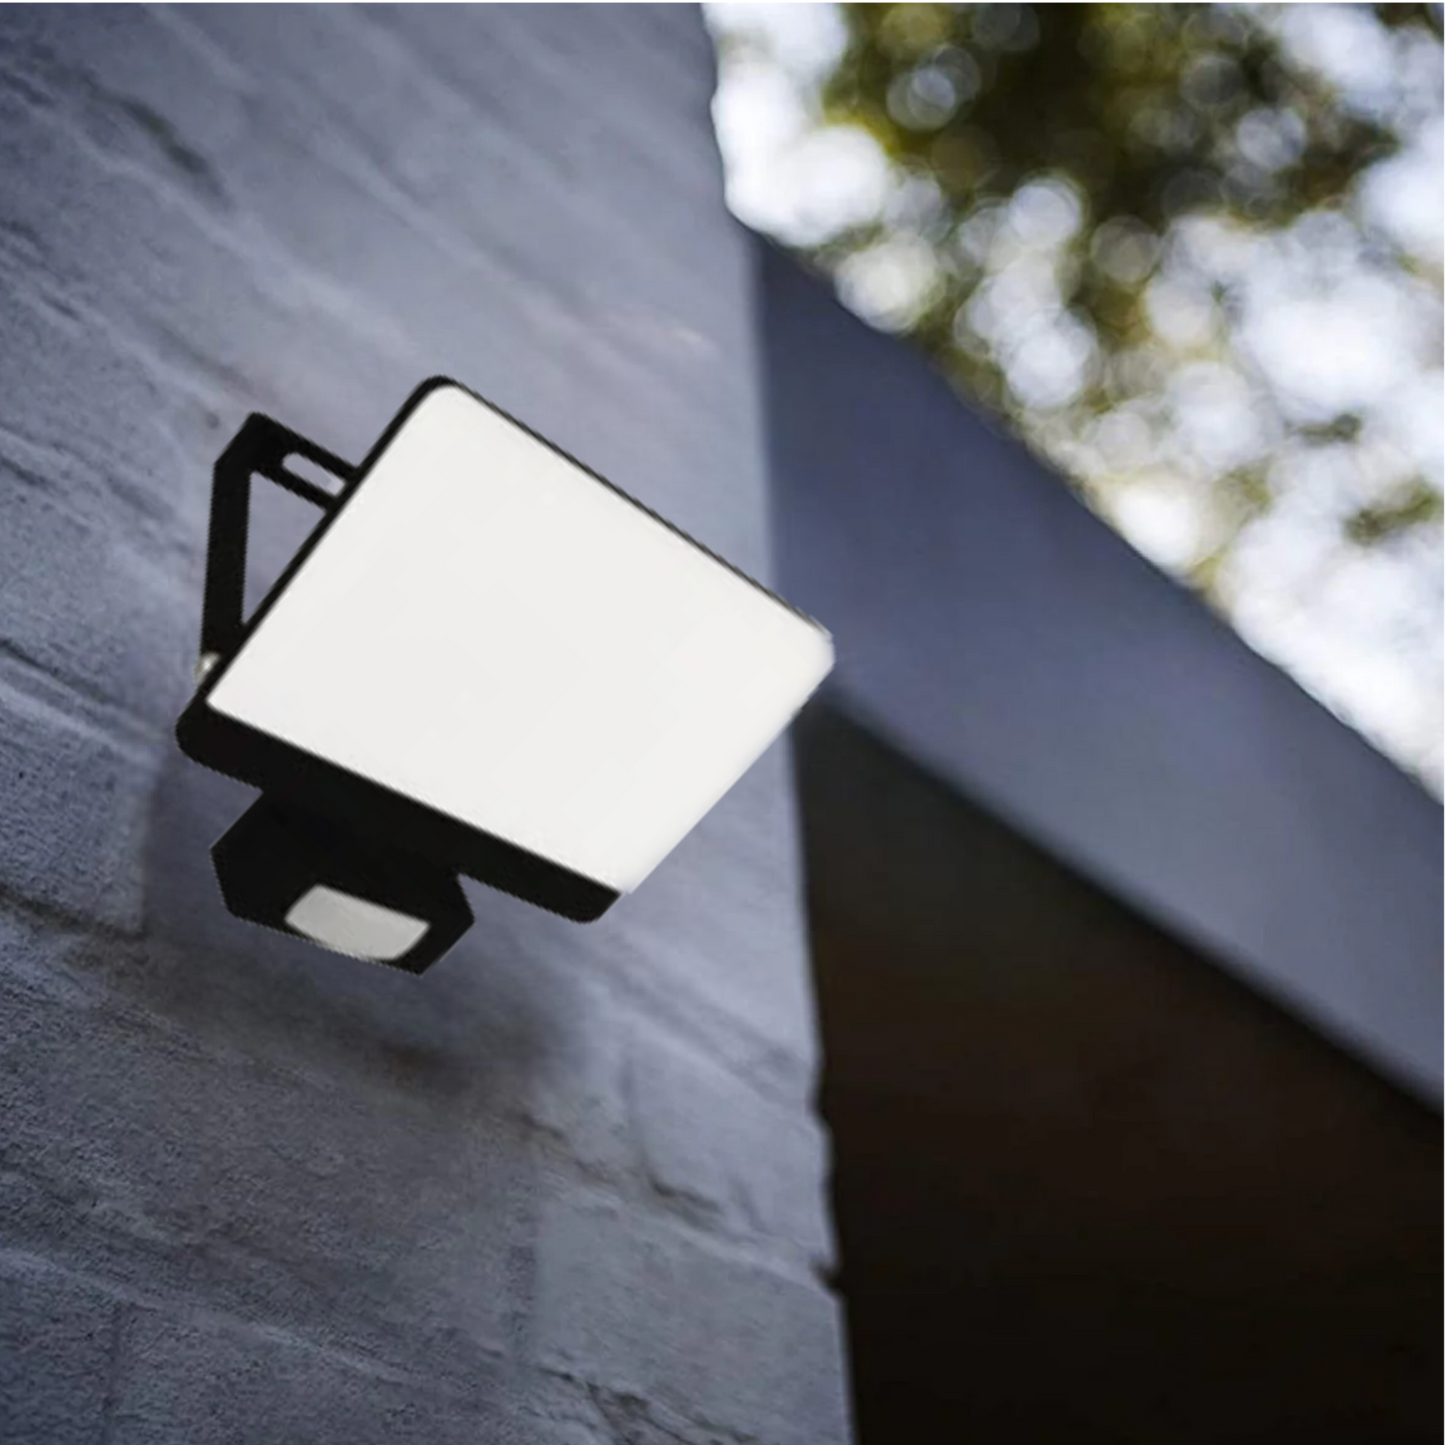 Our Parry LED outdoor wall light with built in PIR motion sensor is a highly efficient light source.  This flood light is a stylish outdoor solution for your home. It has a solid aluminium construction and a polycarbonate cover. The easily adjustable design of this outdoor flood light allows it to be used functionally for lighting paths and aesthetically decorate the walls of your home with a beautiful, bright glow.